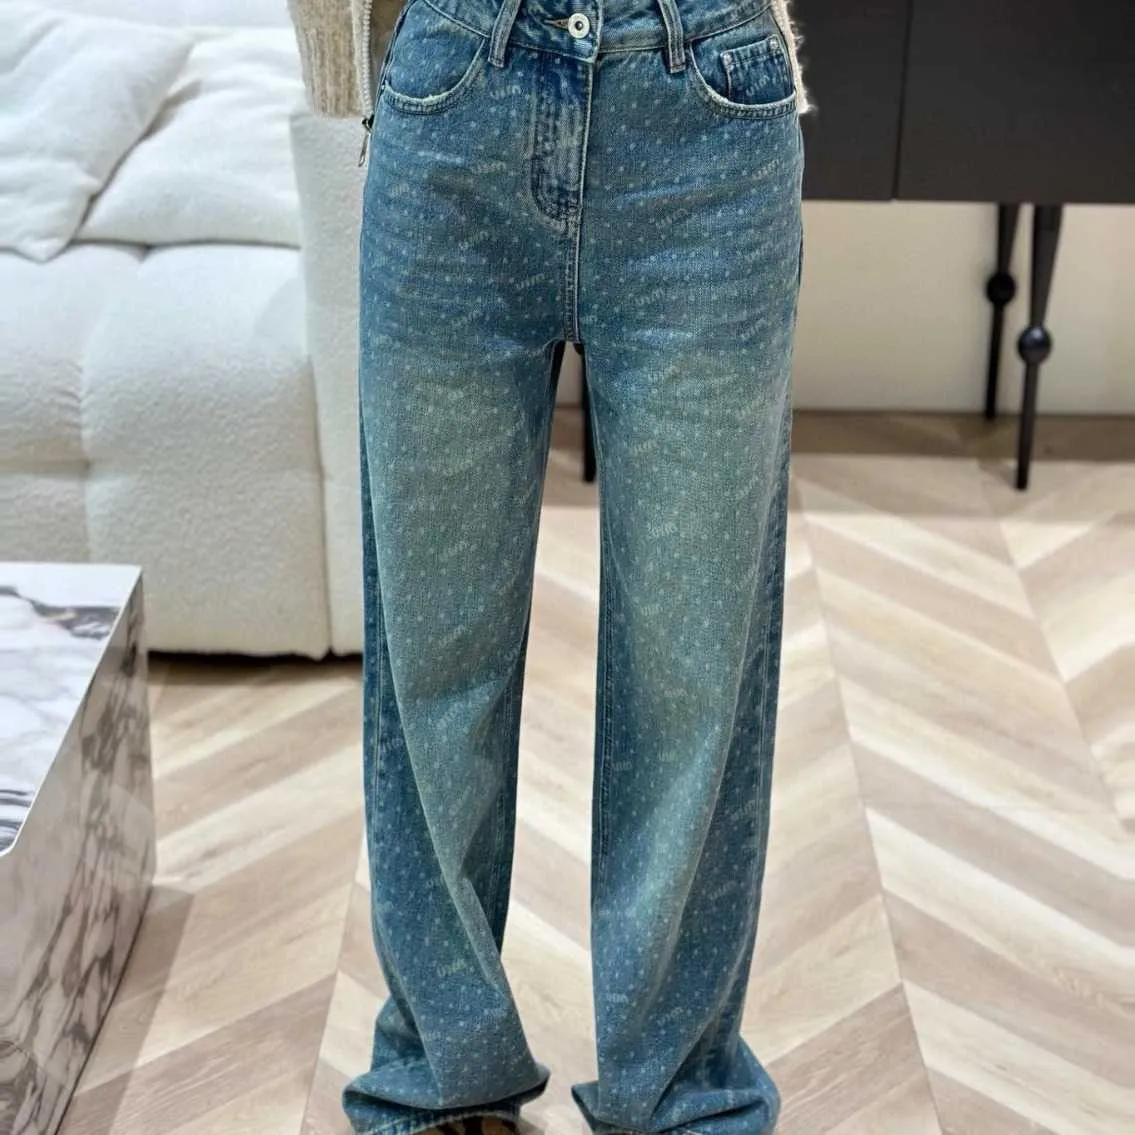 Mm Early Sting New Fashion Printed Letter Versatile Straight Leg Jeans